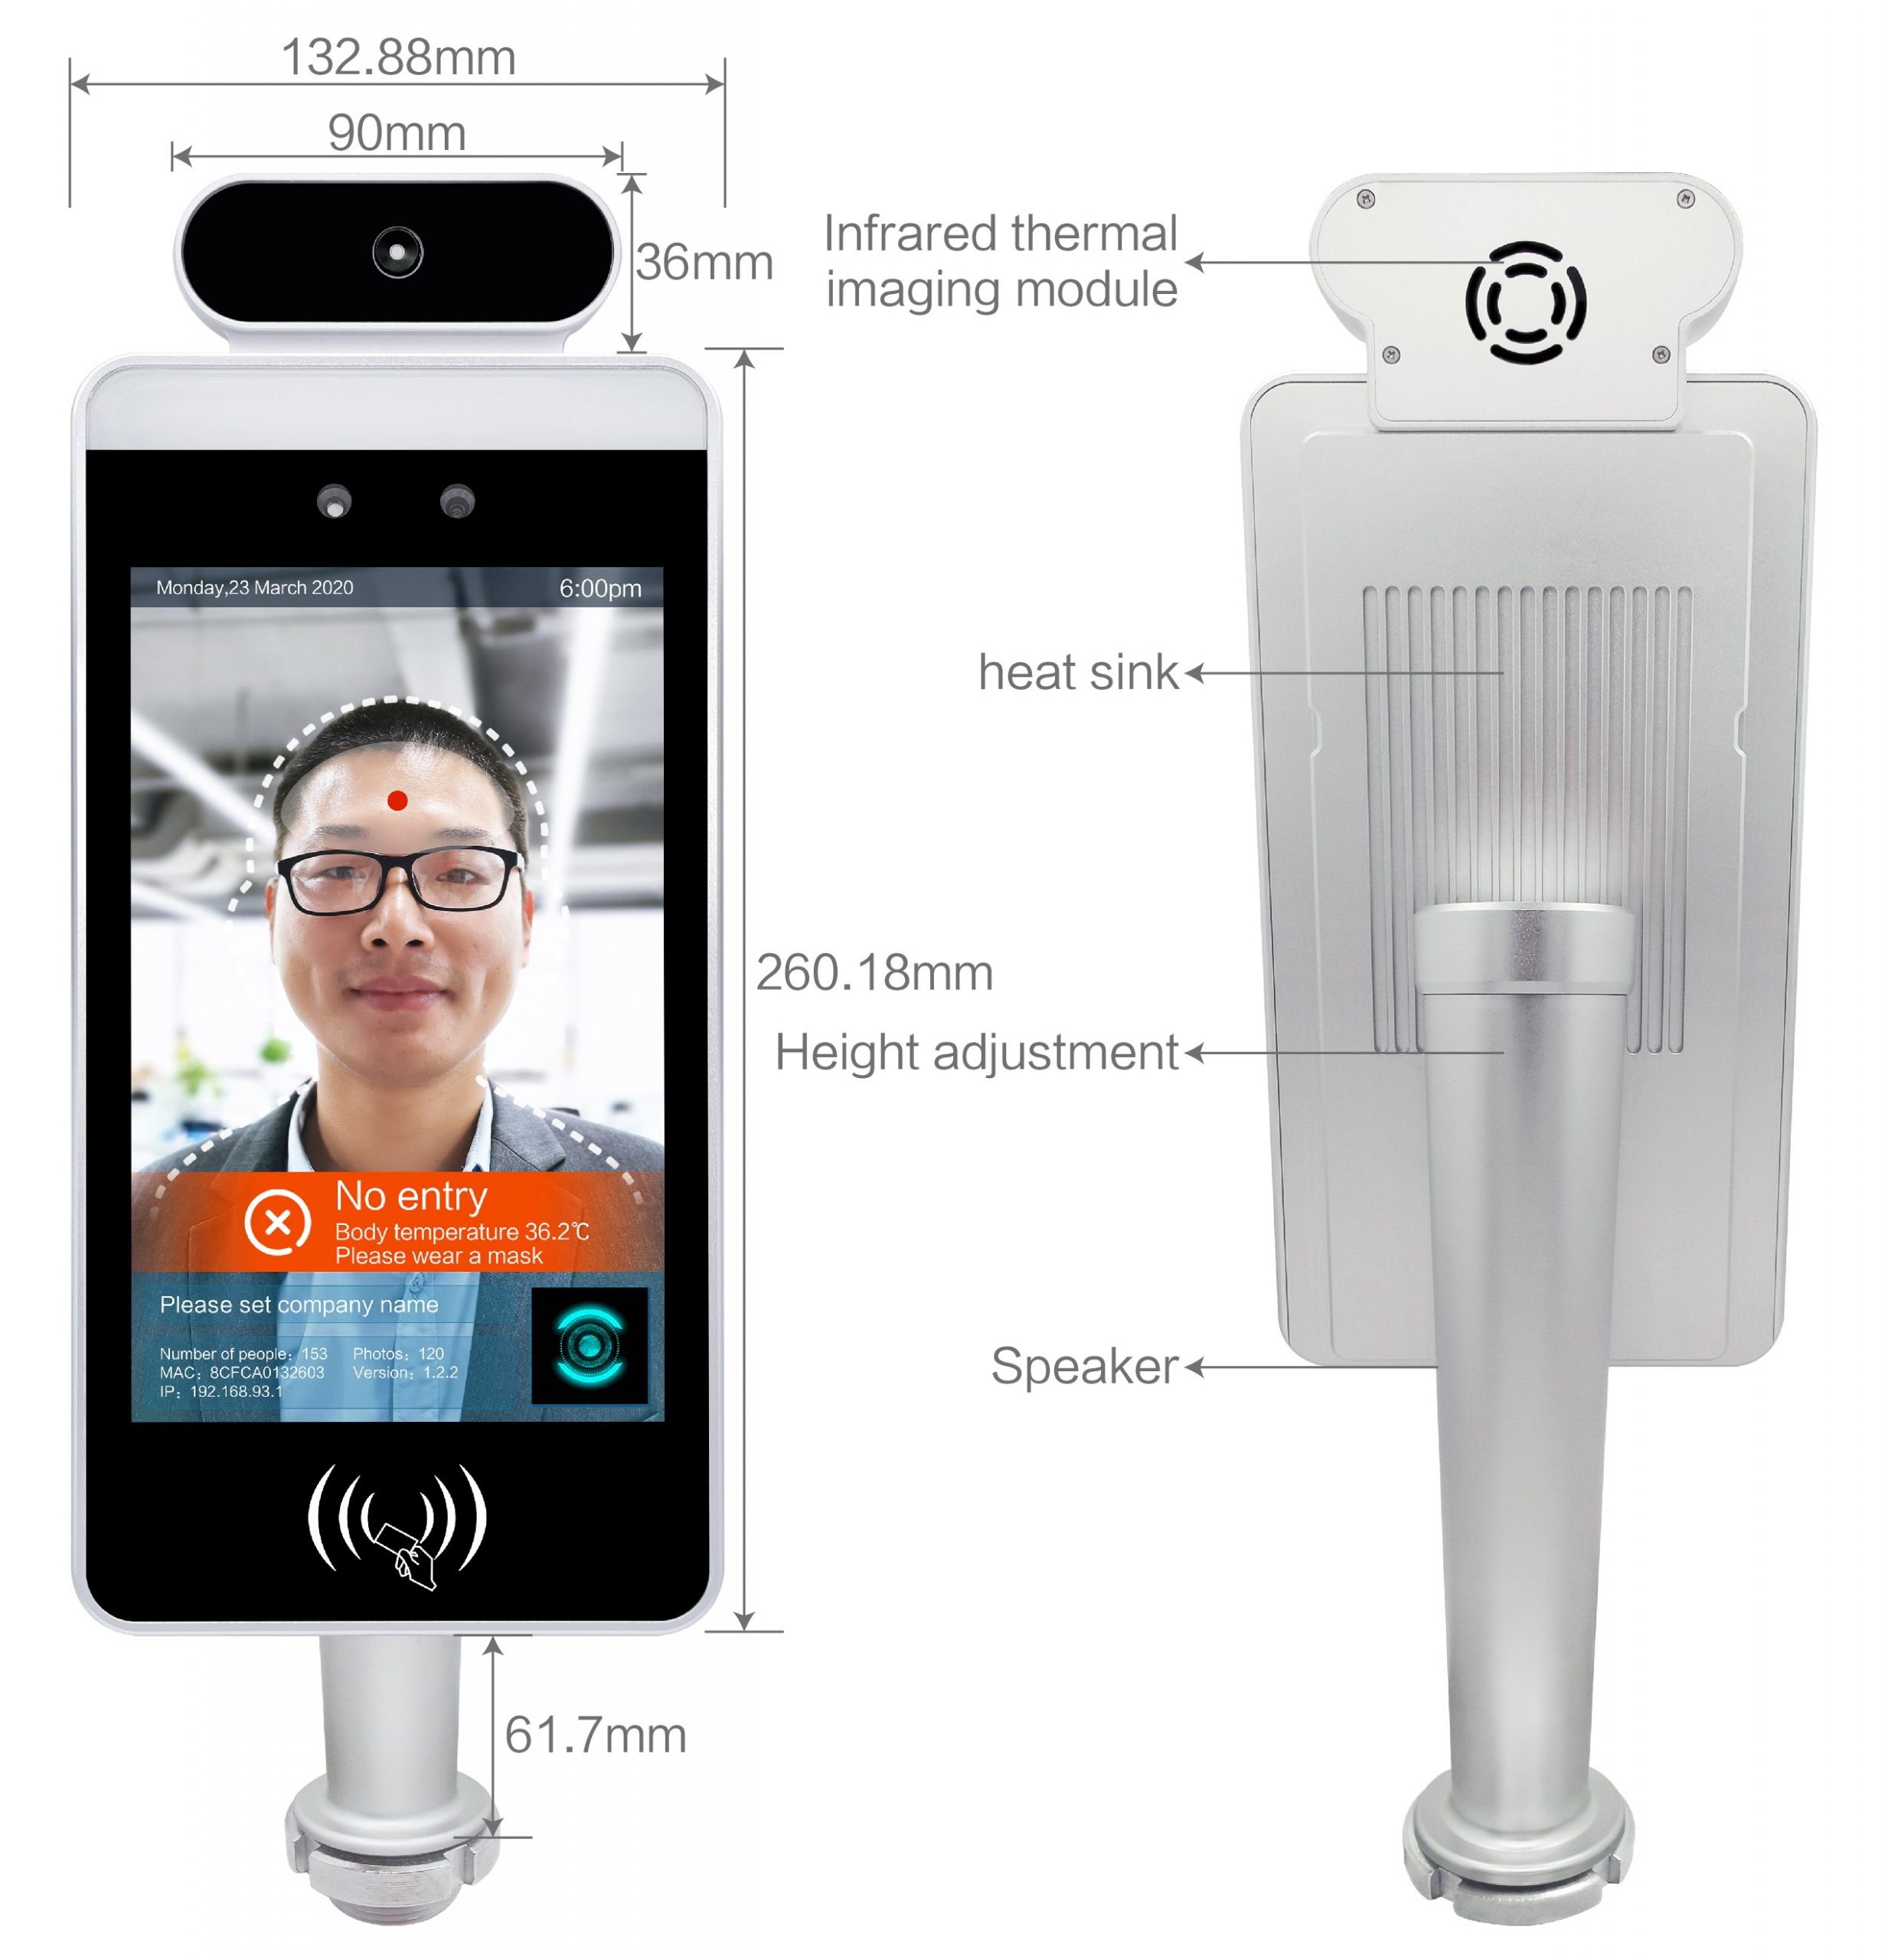 Facial Recognition Temperature Sensor - Appearance and Size